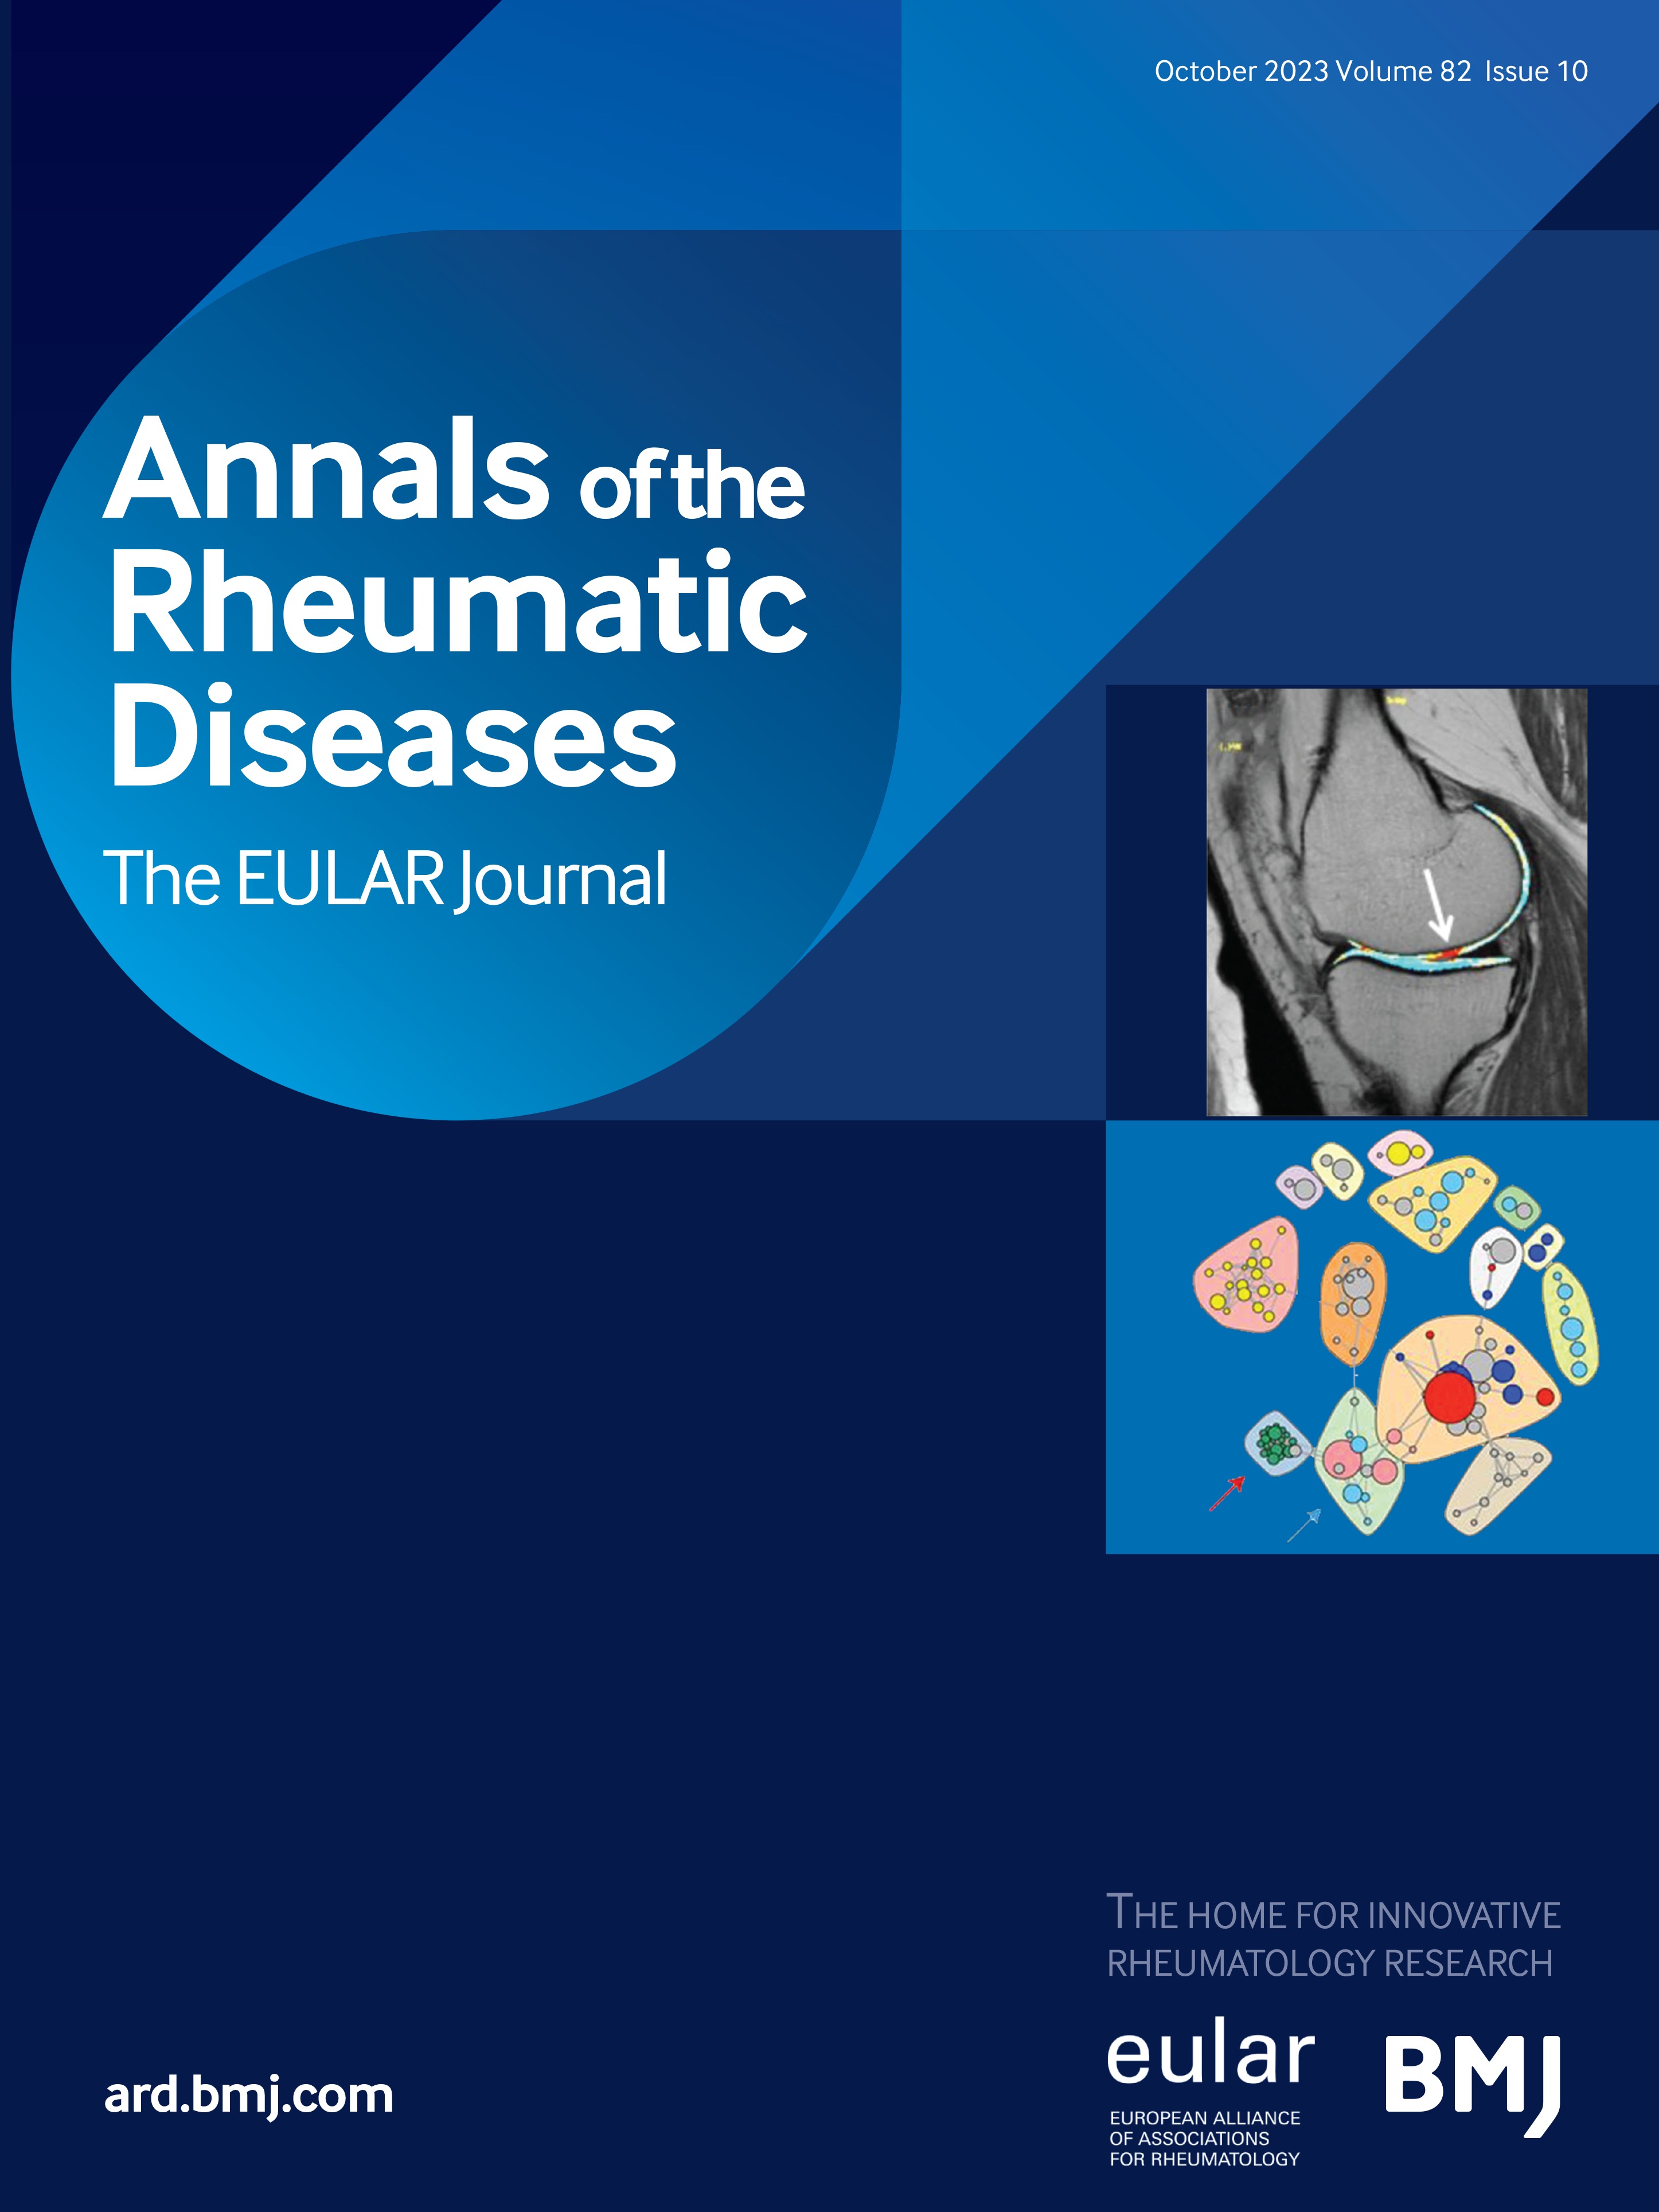 Annals of the Rheumatic Diseases collection on autoantibodies in the rheumatic diseases: new insights into pathogenesis and the development of novel biomarkers